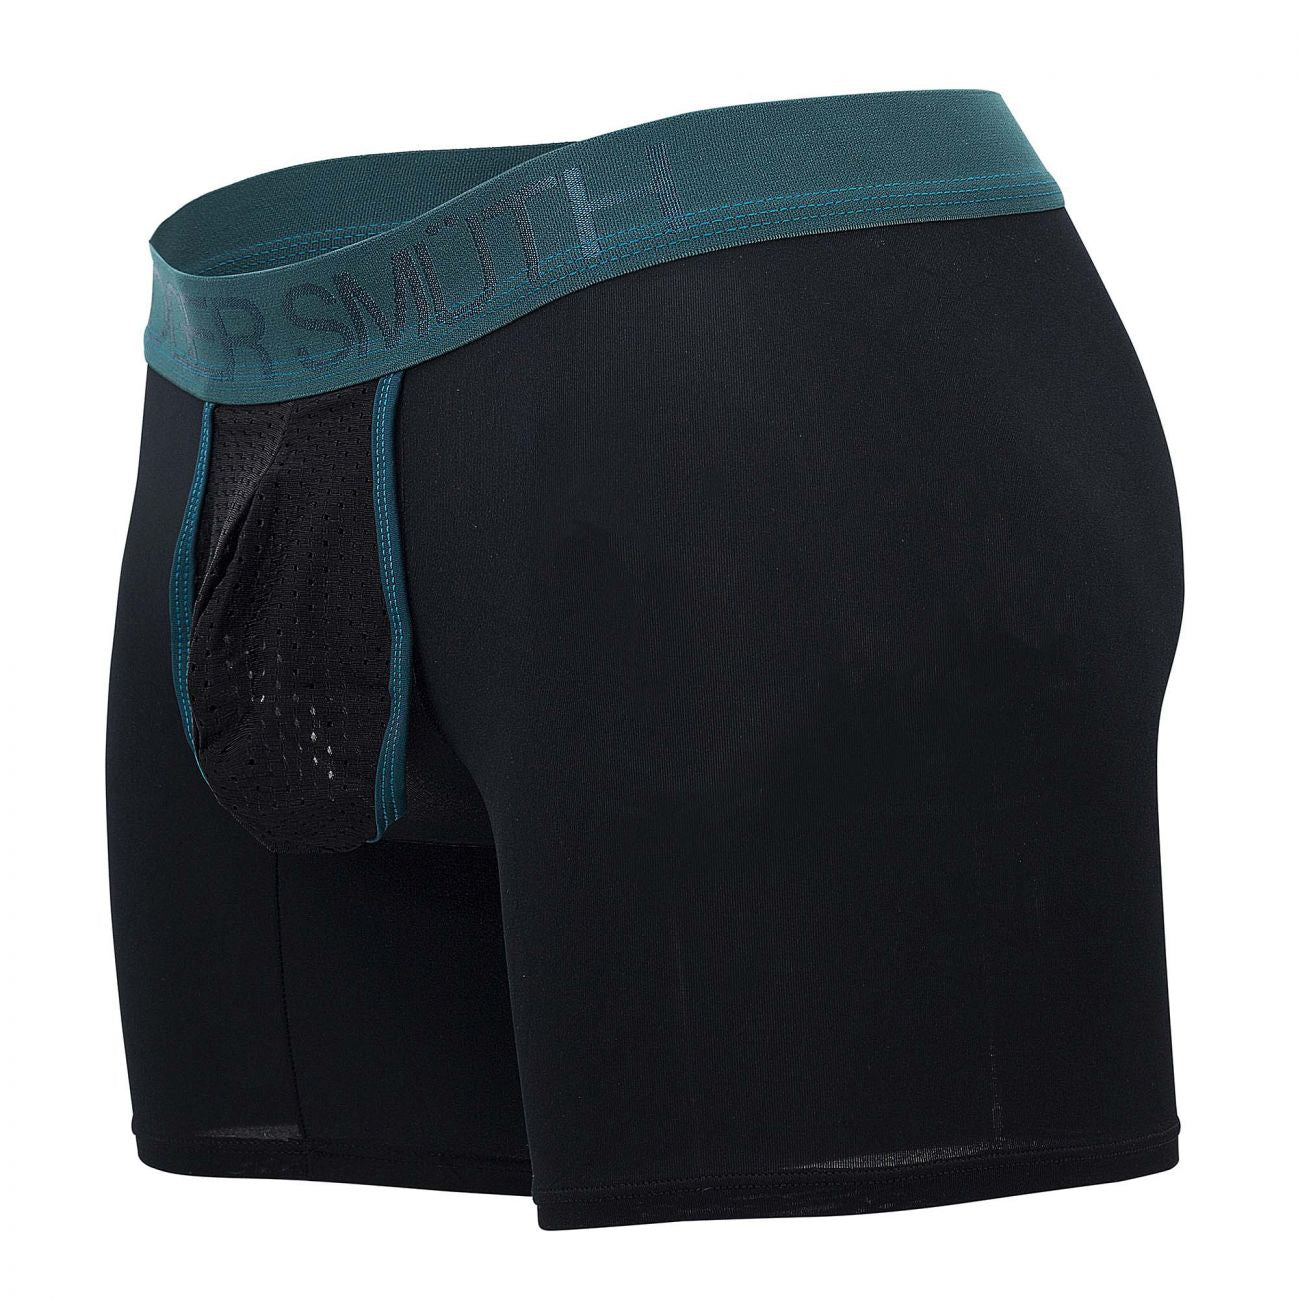 Roger Smuth RS019 Boxer Briefs